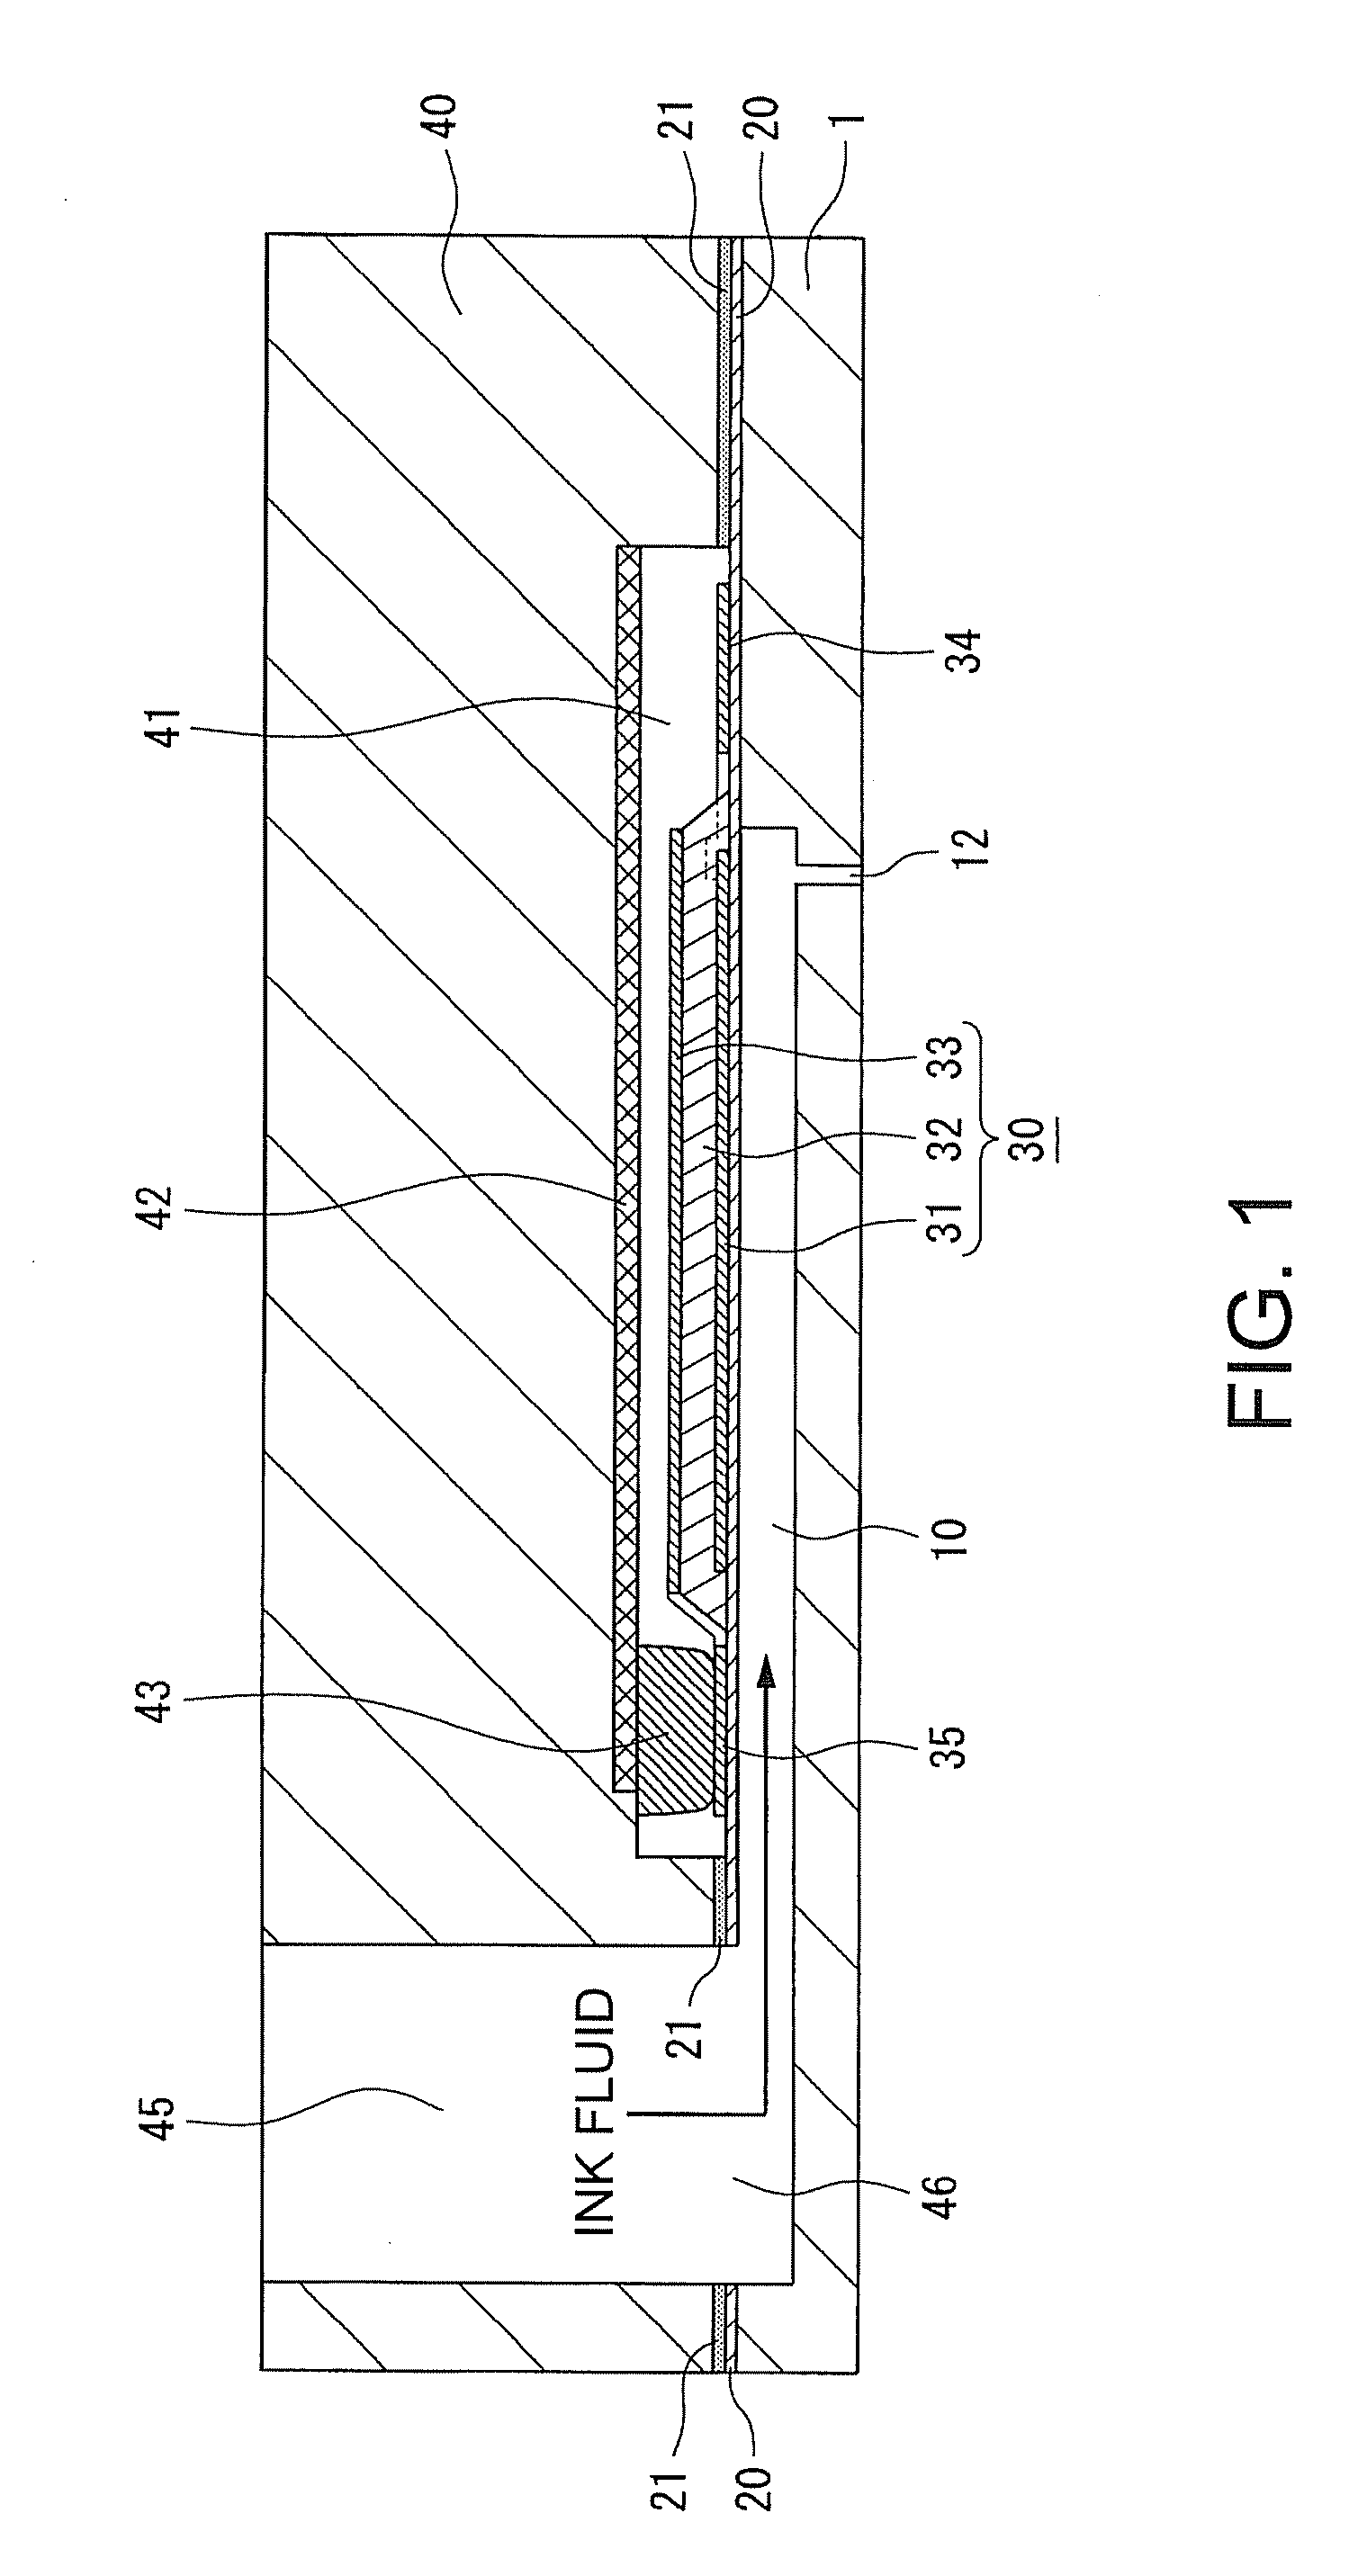 Inkjet recording head, inkjet recording device, and method for manufacturing the inkjet recording head